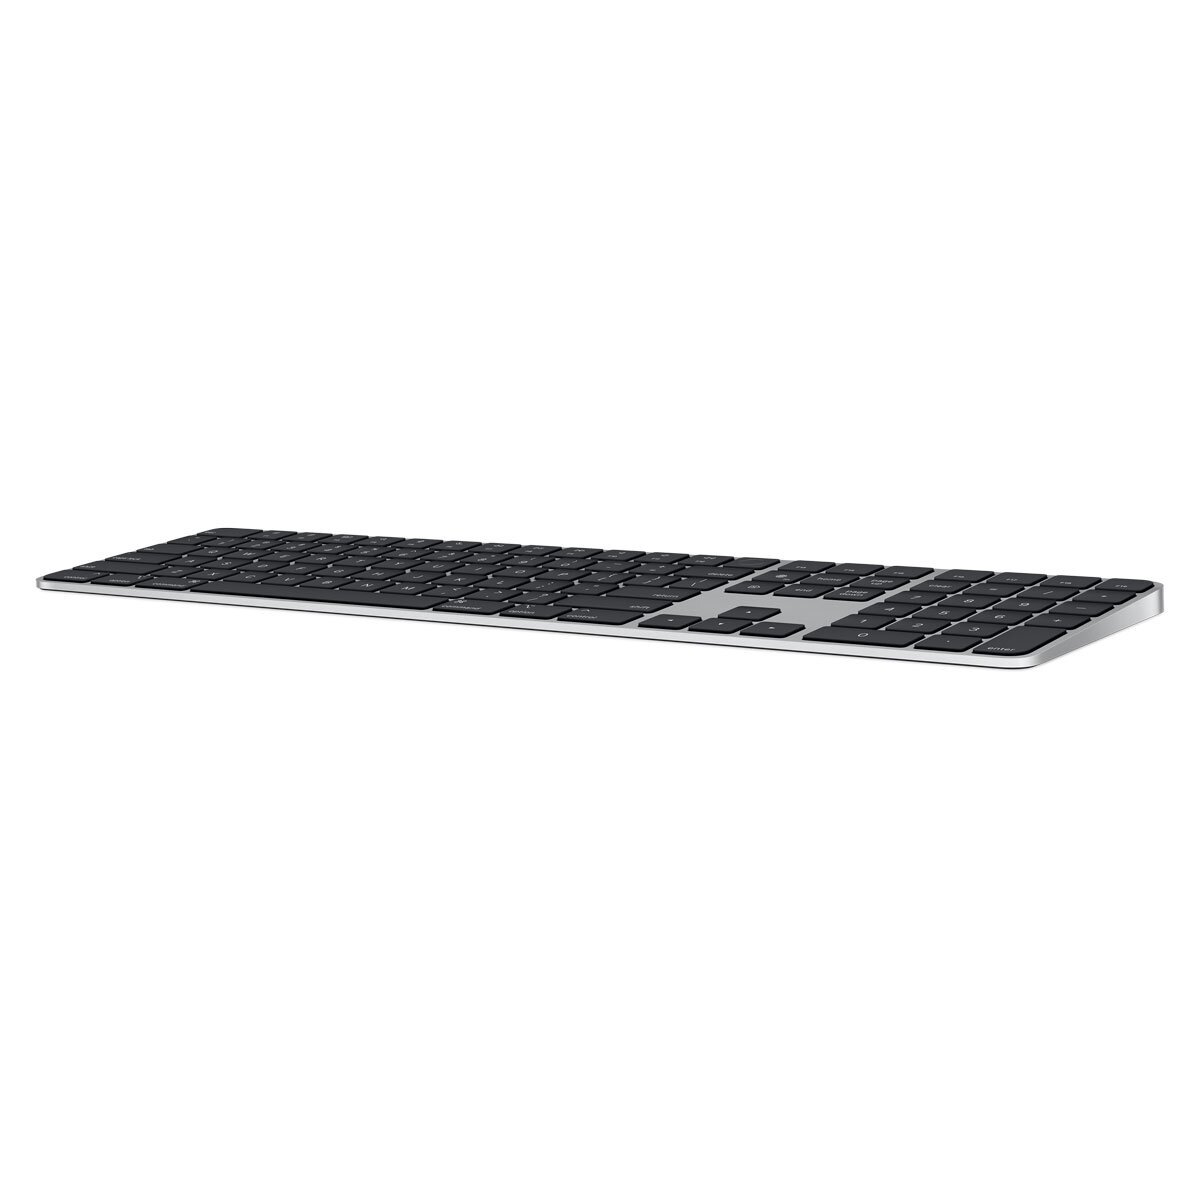 Buy Apple Magic Keyboard with Touch ID and Numeric Keypad for Mac models with Apple silicon - British English - Black Keys, MMMR3B/A at costco.co.uk